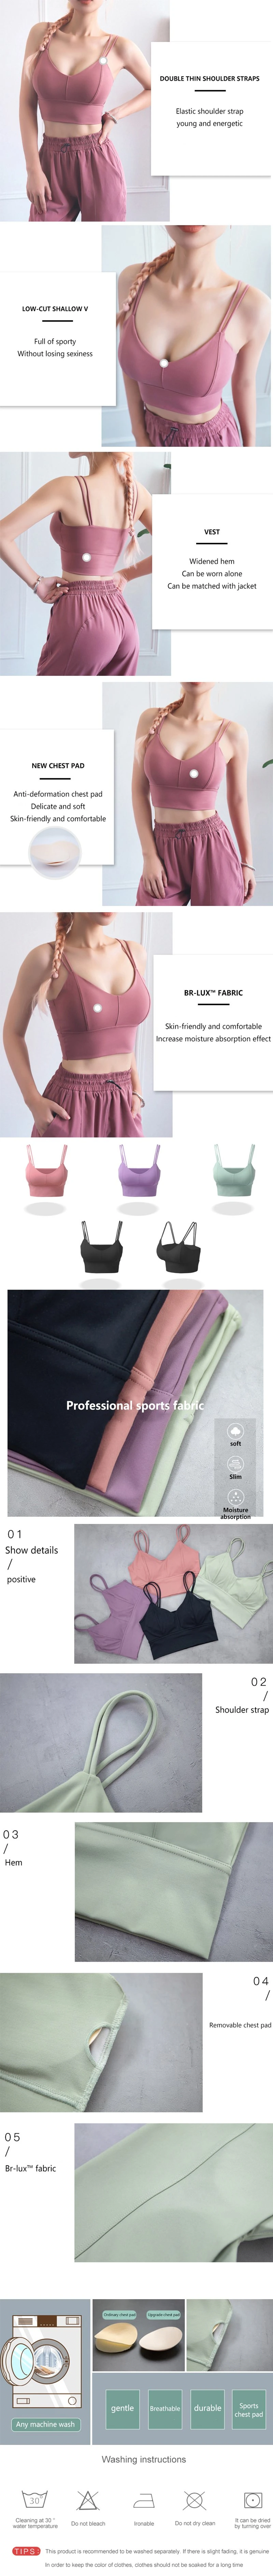 Fashionable Wholesale Womens Hoodie Push up Hooded Crop Top Sports Bra